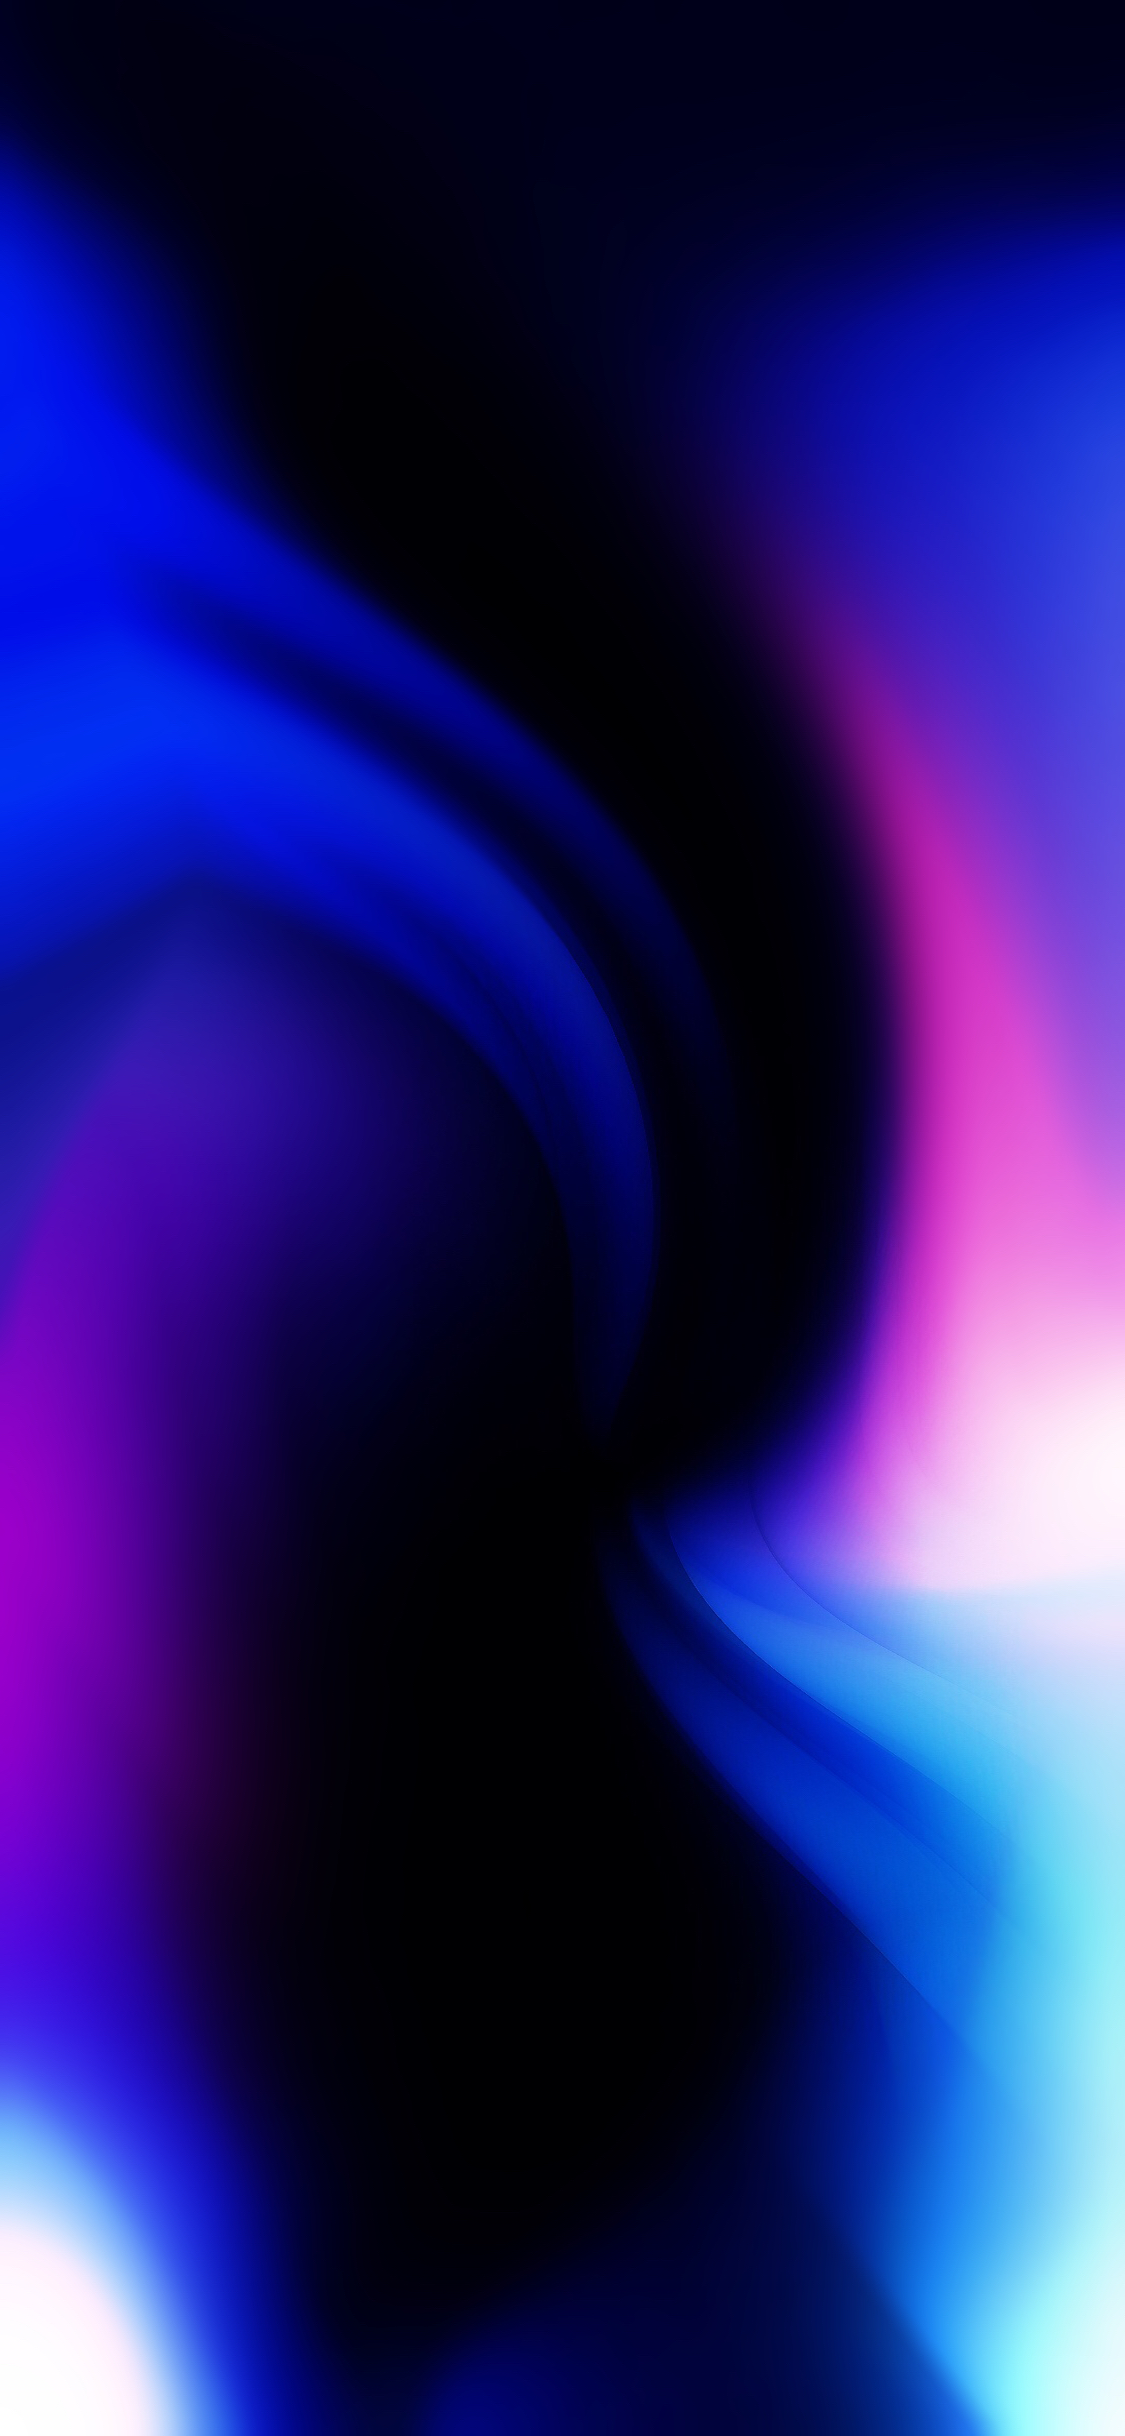 Abstract wallpaper: vivid contrasting colors [pack 3]